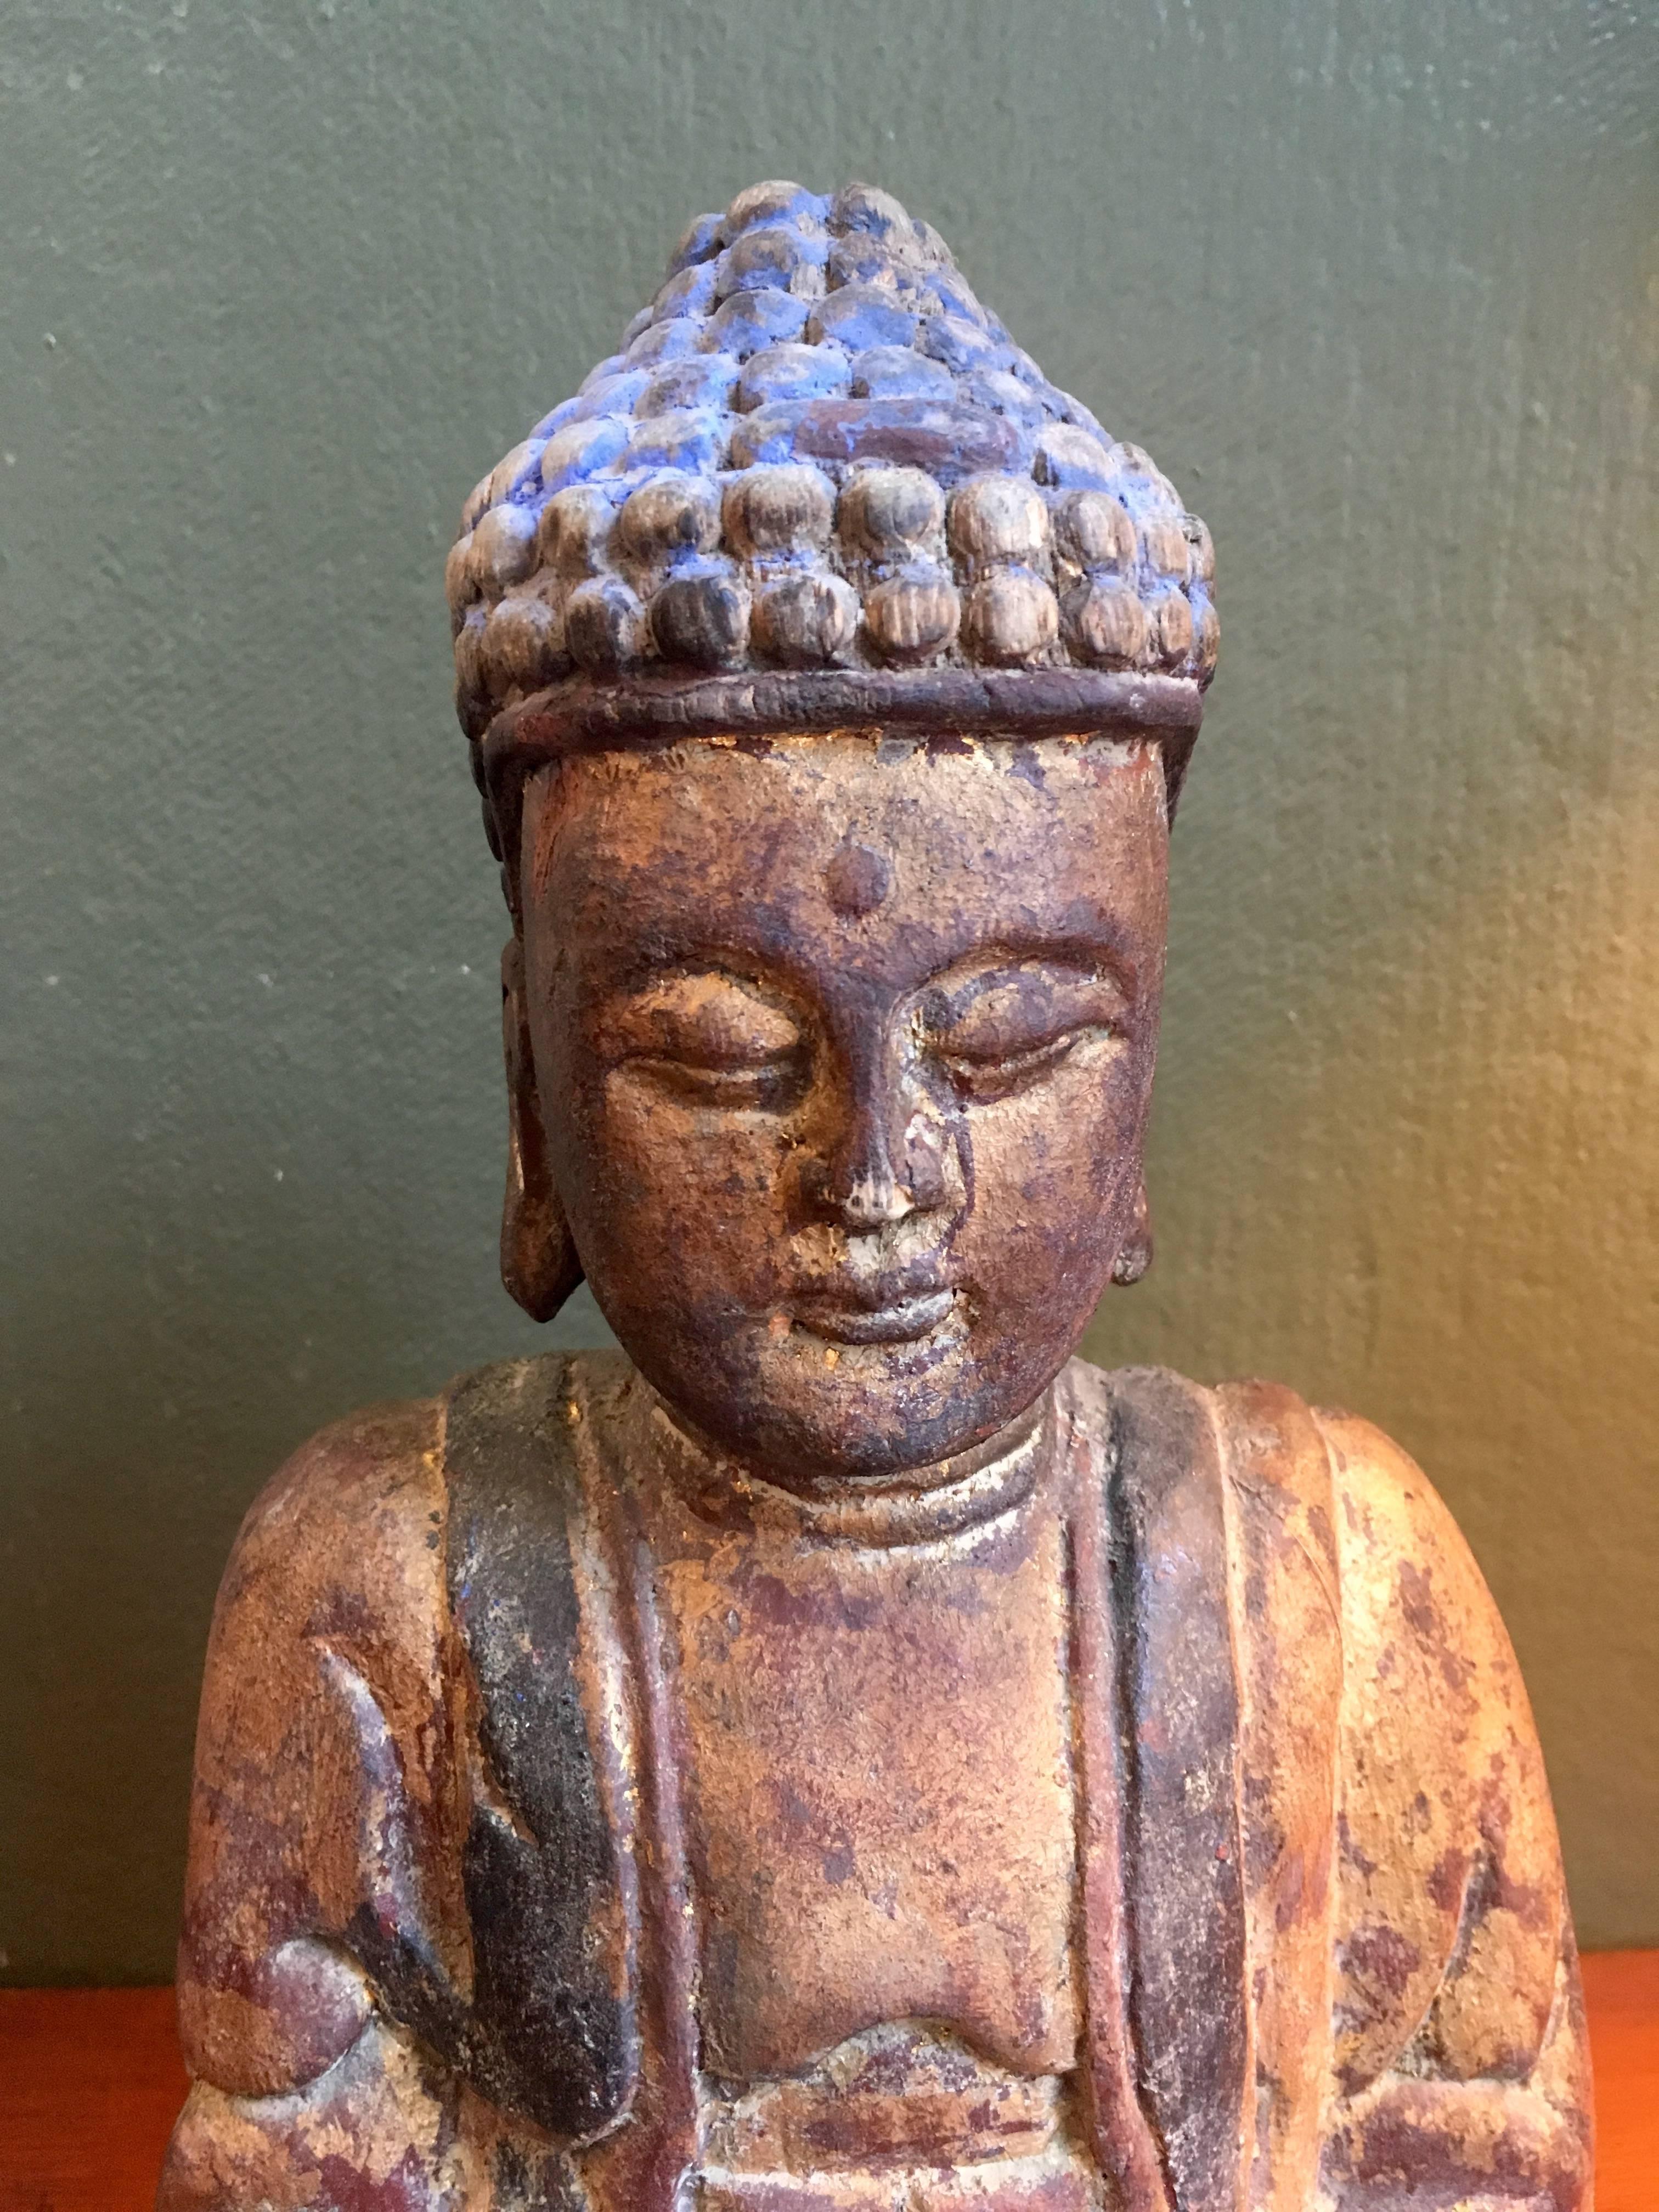 Qing Vintage Carved and Gilded Buddha with Blue on Headpiece